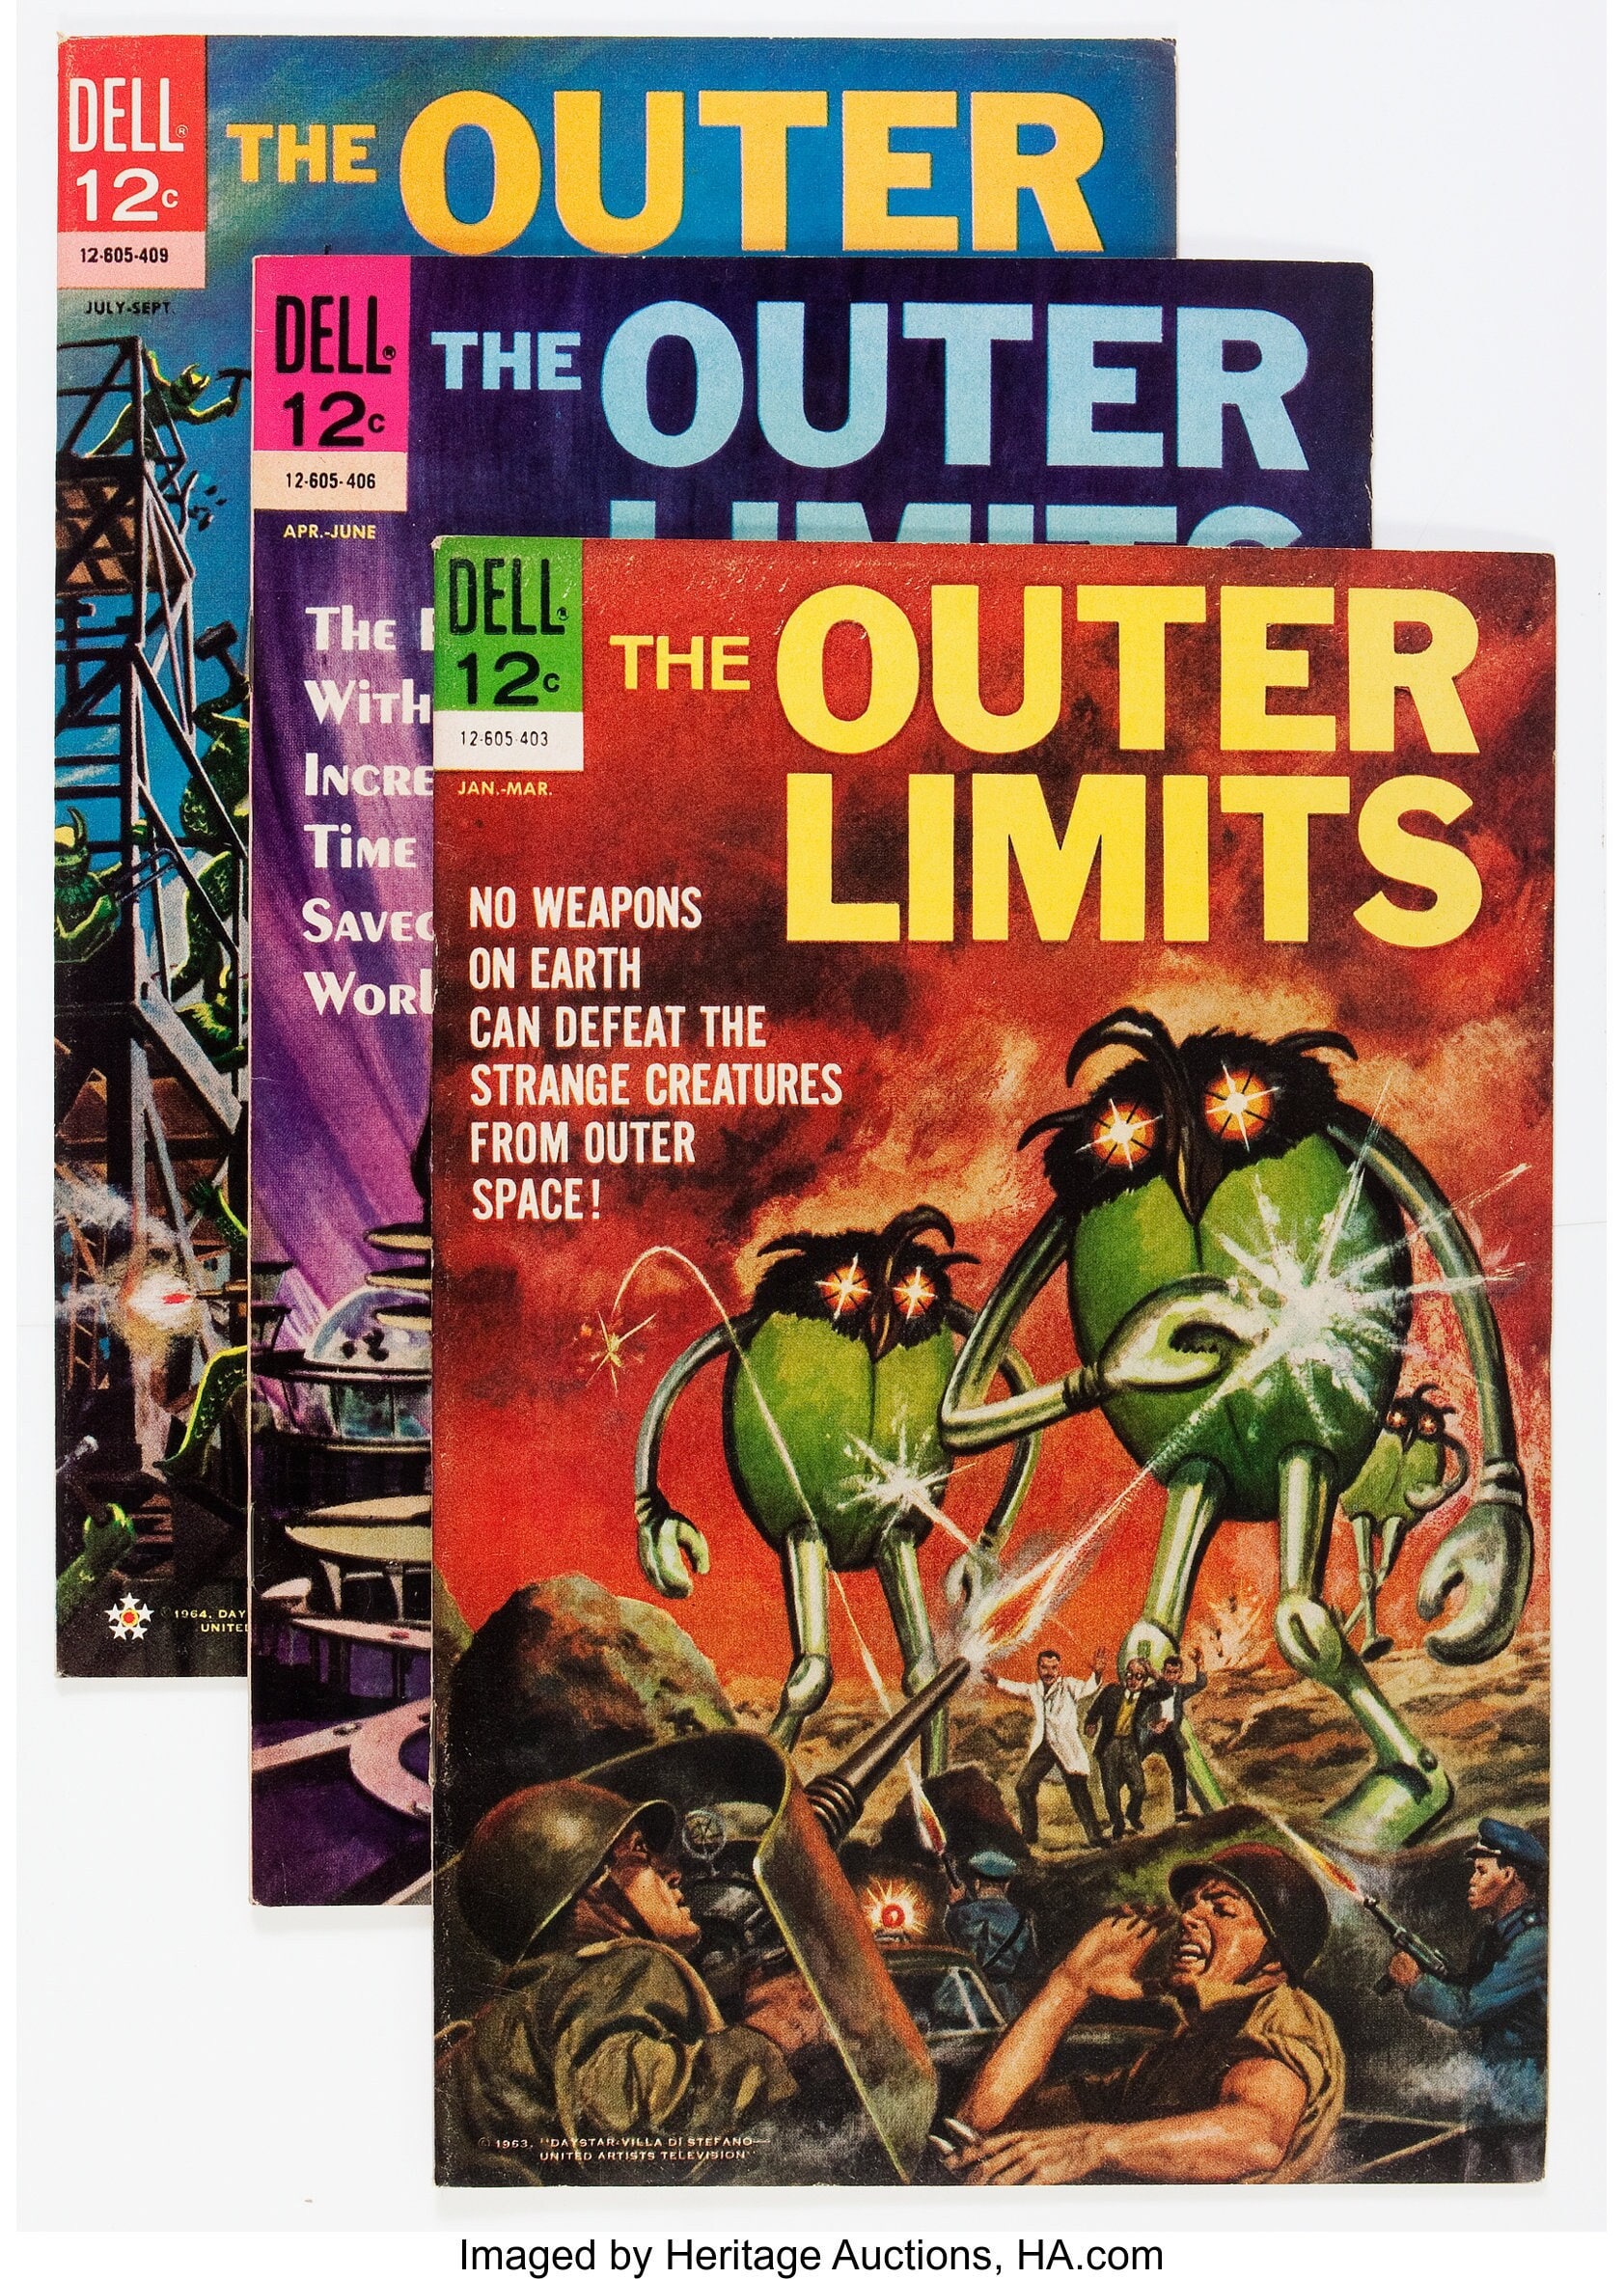 Outer Limits Collection 1964-1969 Comic Books - Etsy